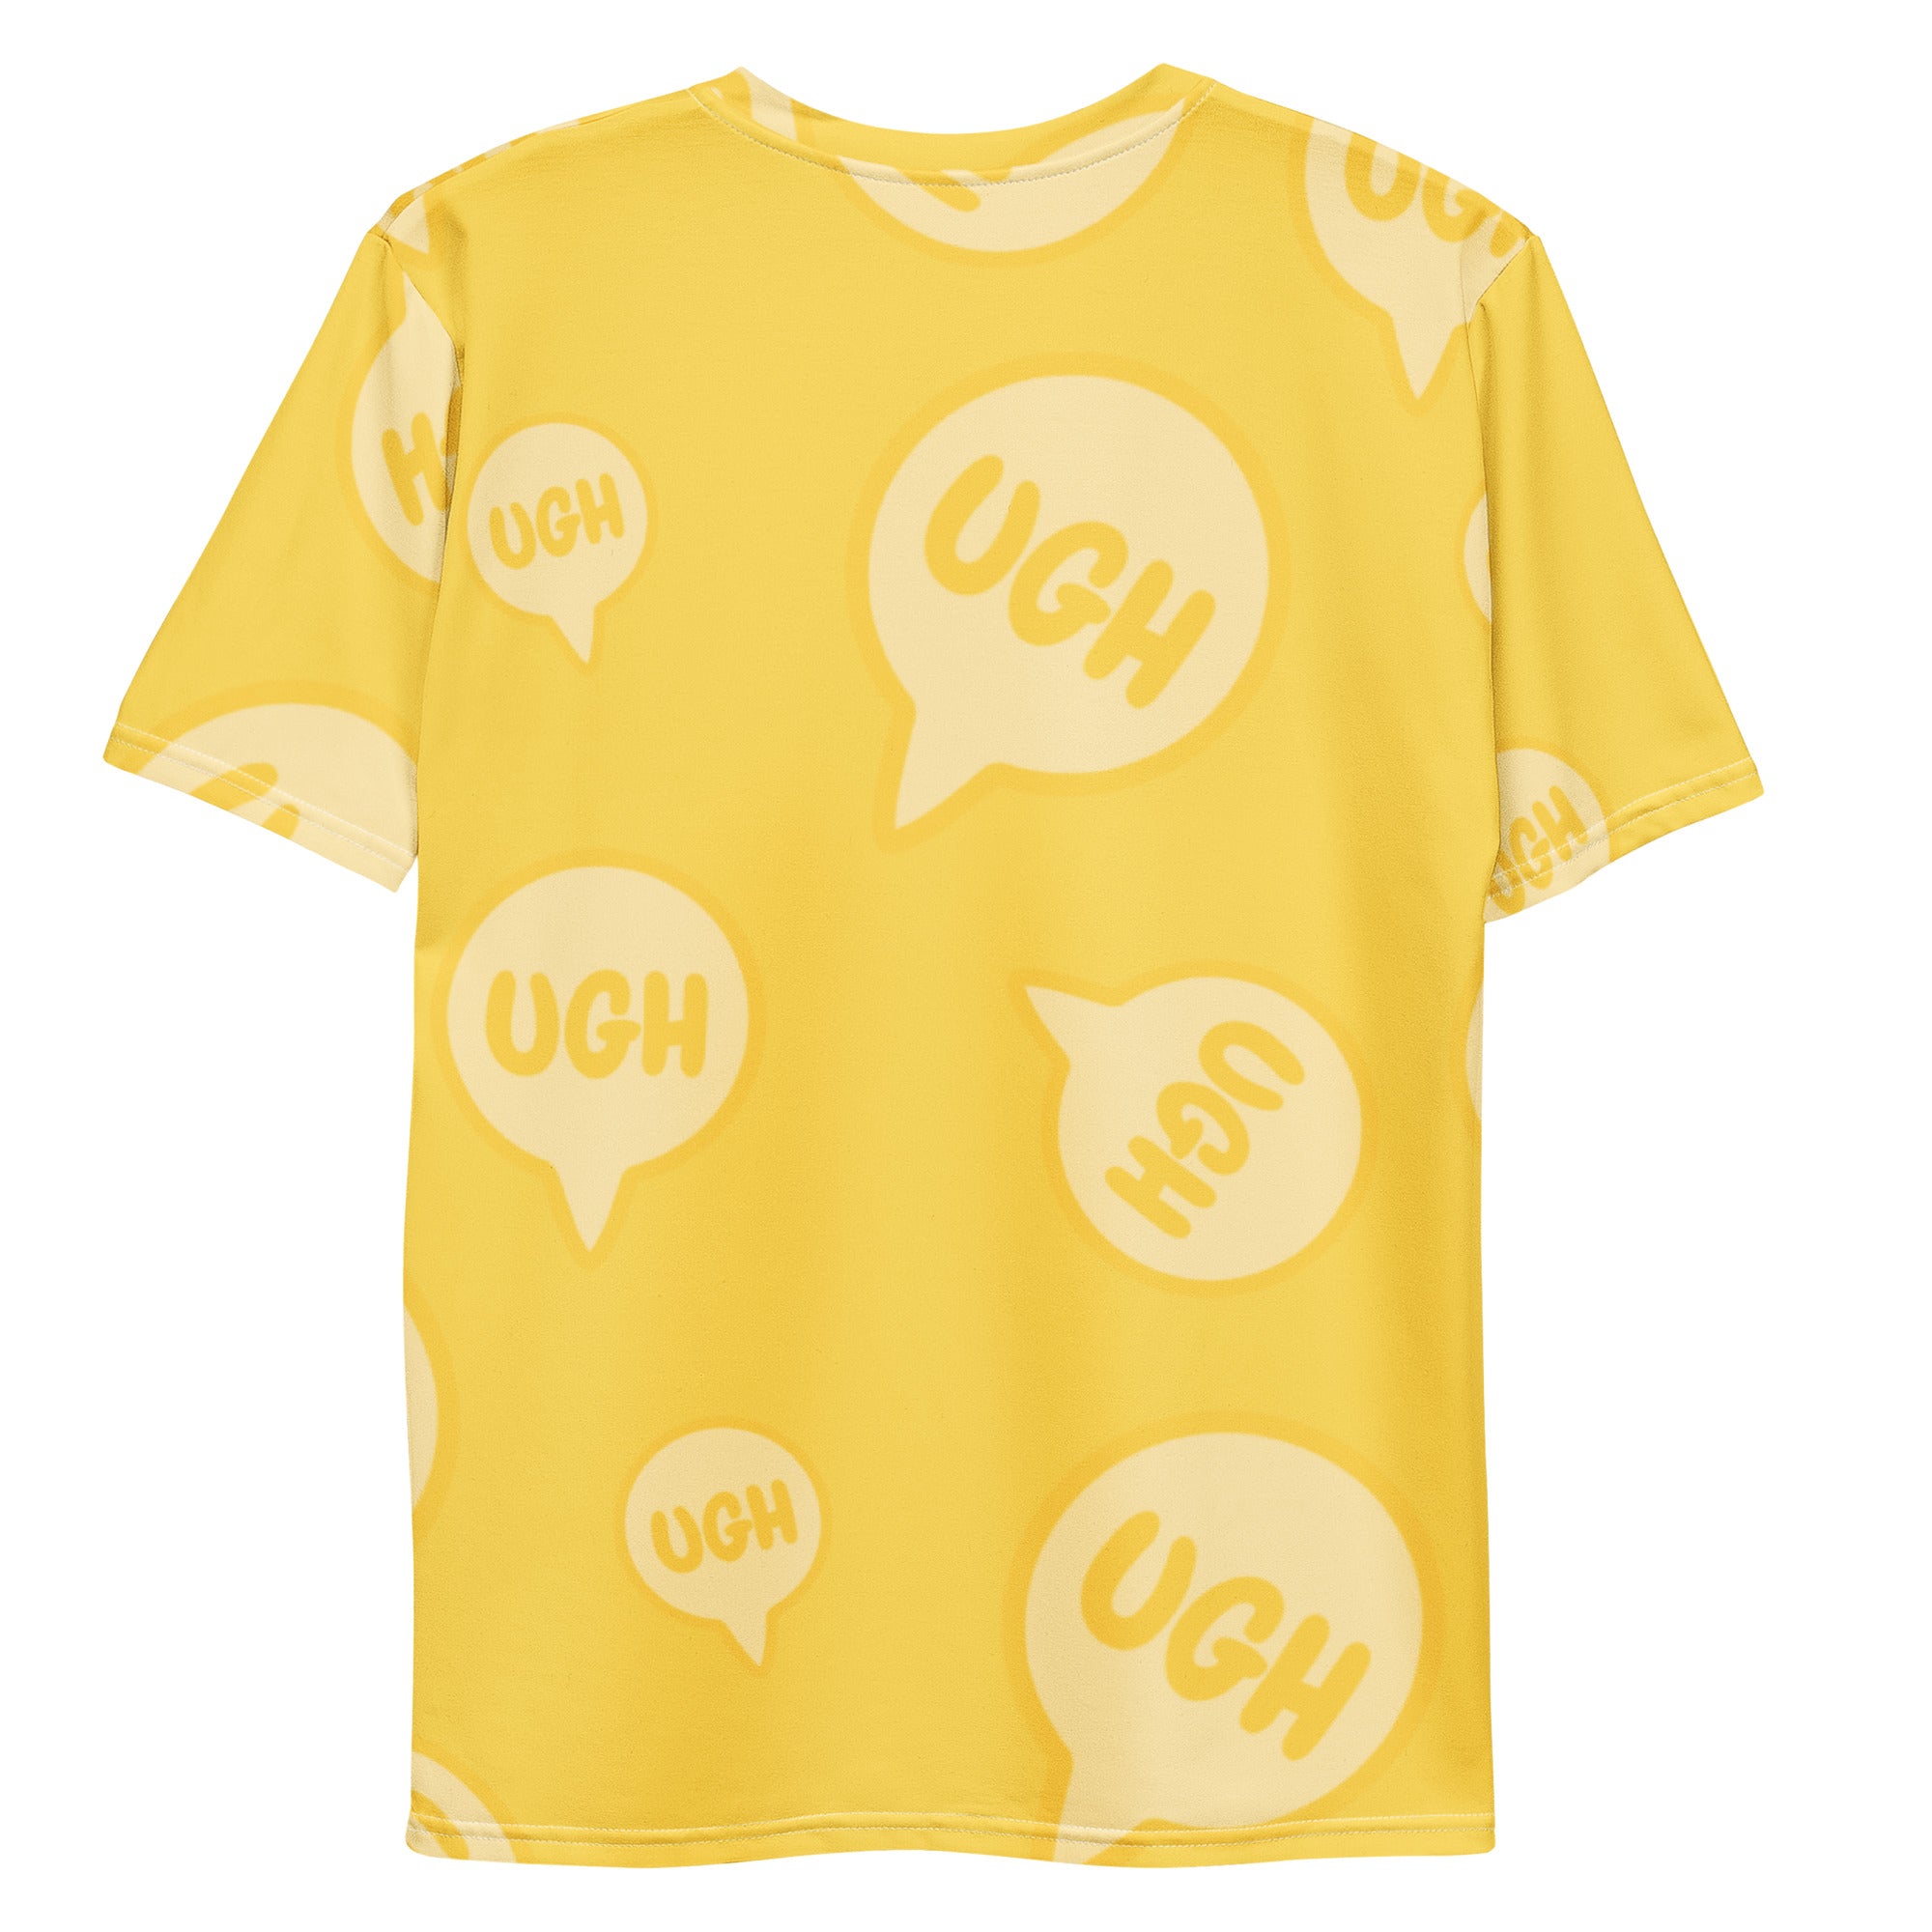 IM HERE YOURE WELCOME - All-Over Print Tee